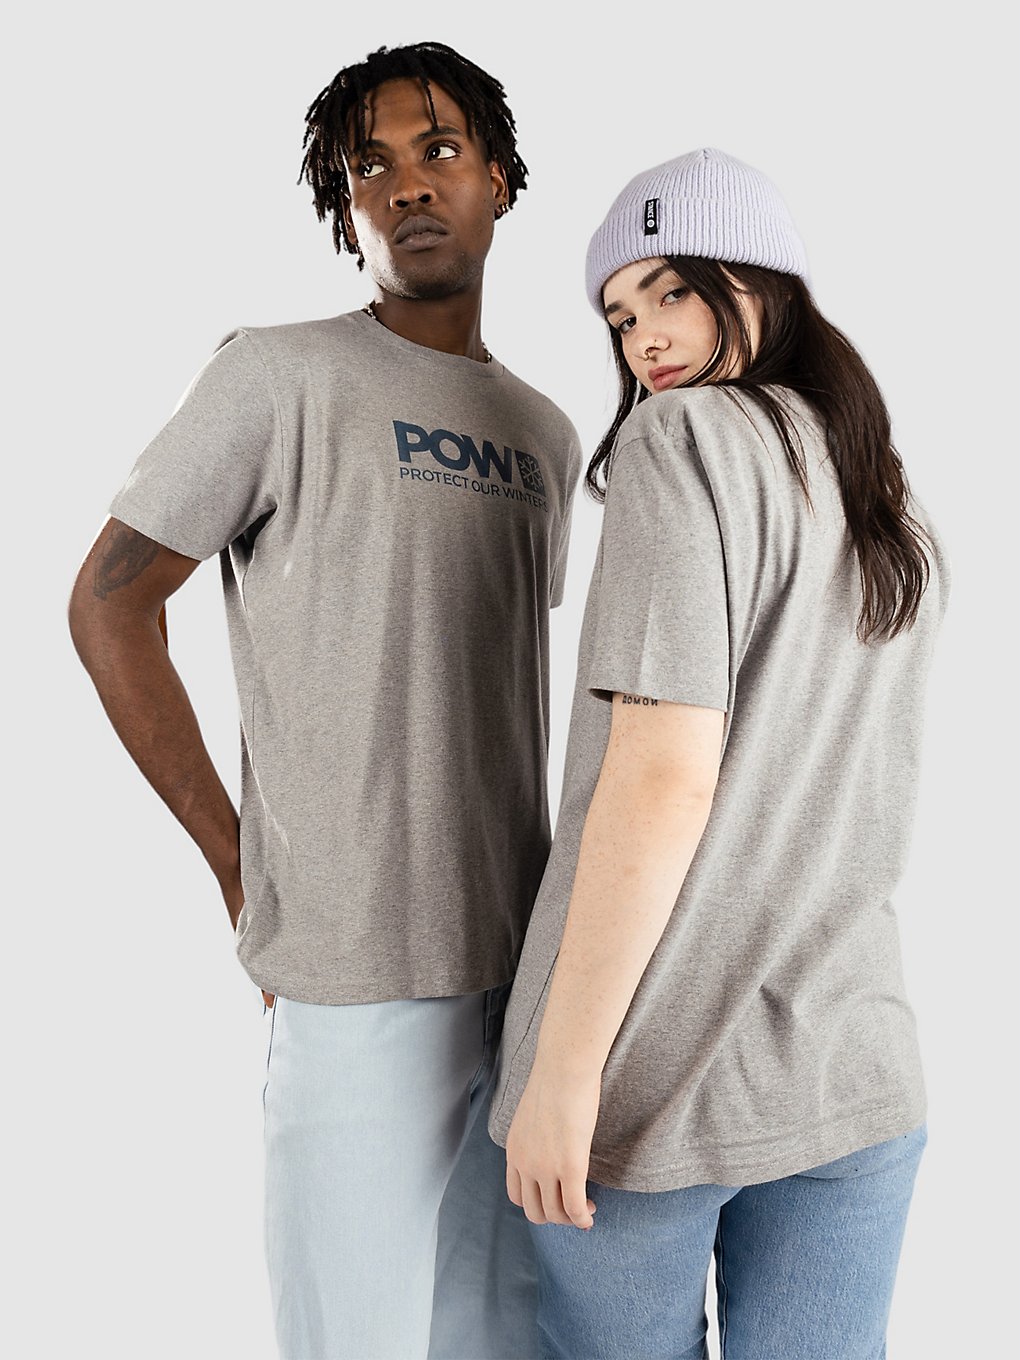 Image of POW Protect Our Winters Logo T-Shirt grigio